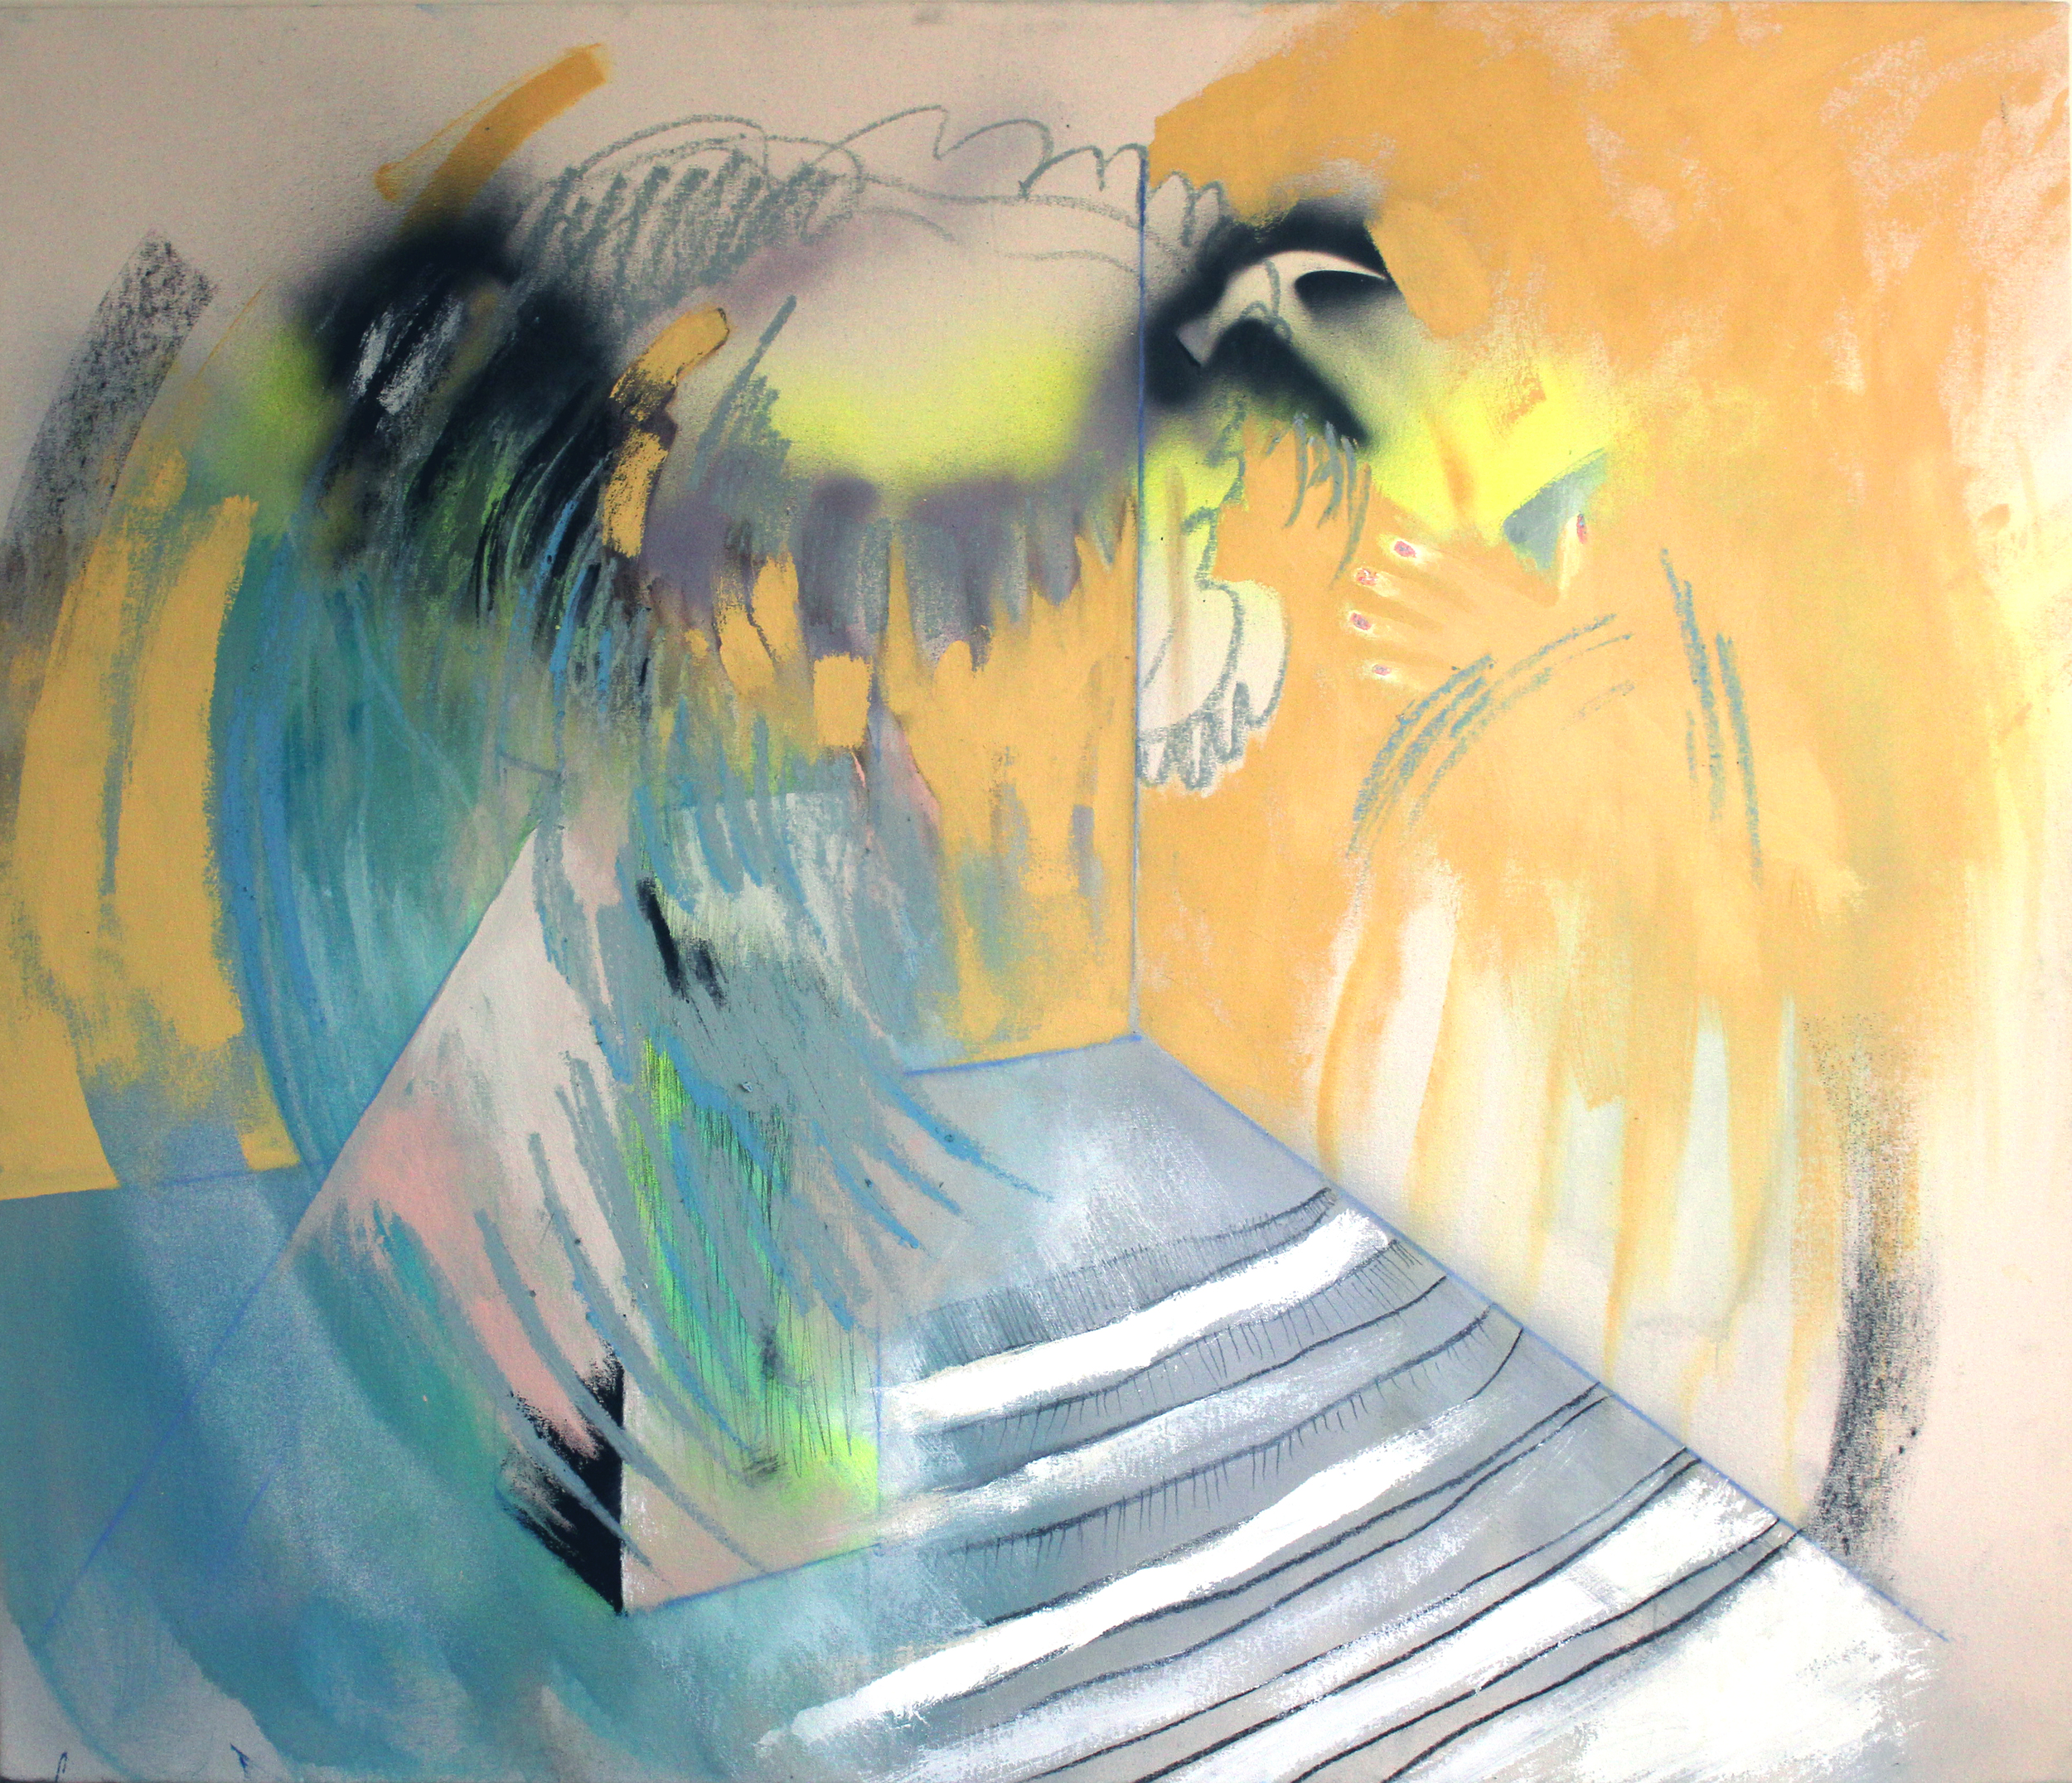   Yellow Studio&nbsp;in Late Afternoon   53"x45" - Acrylic and crayon on canvas 